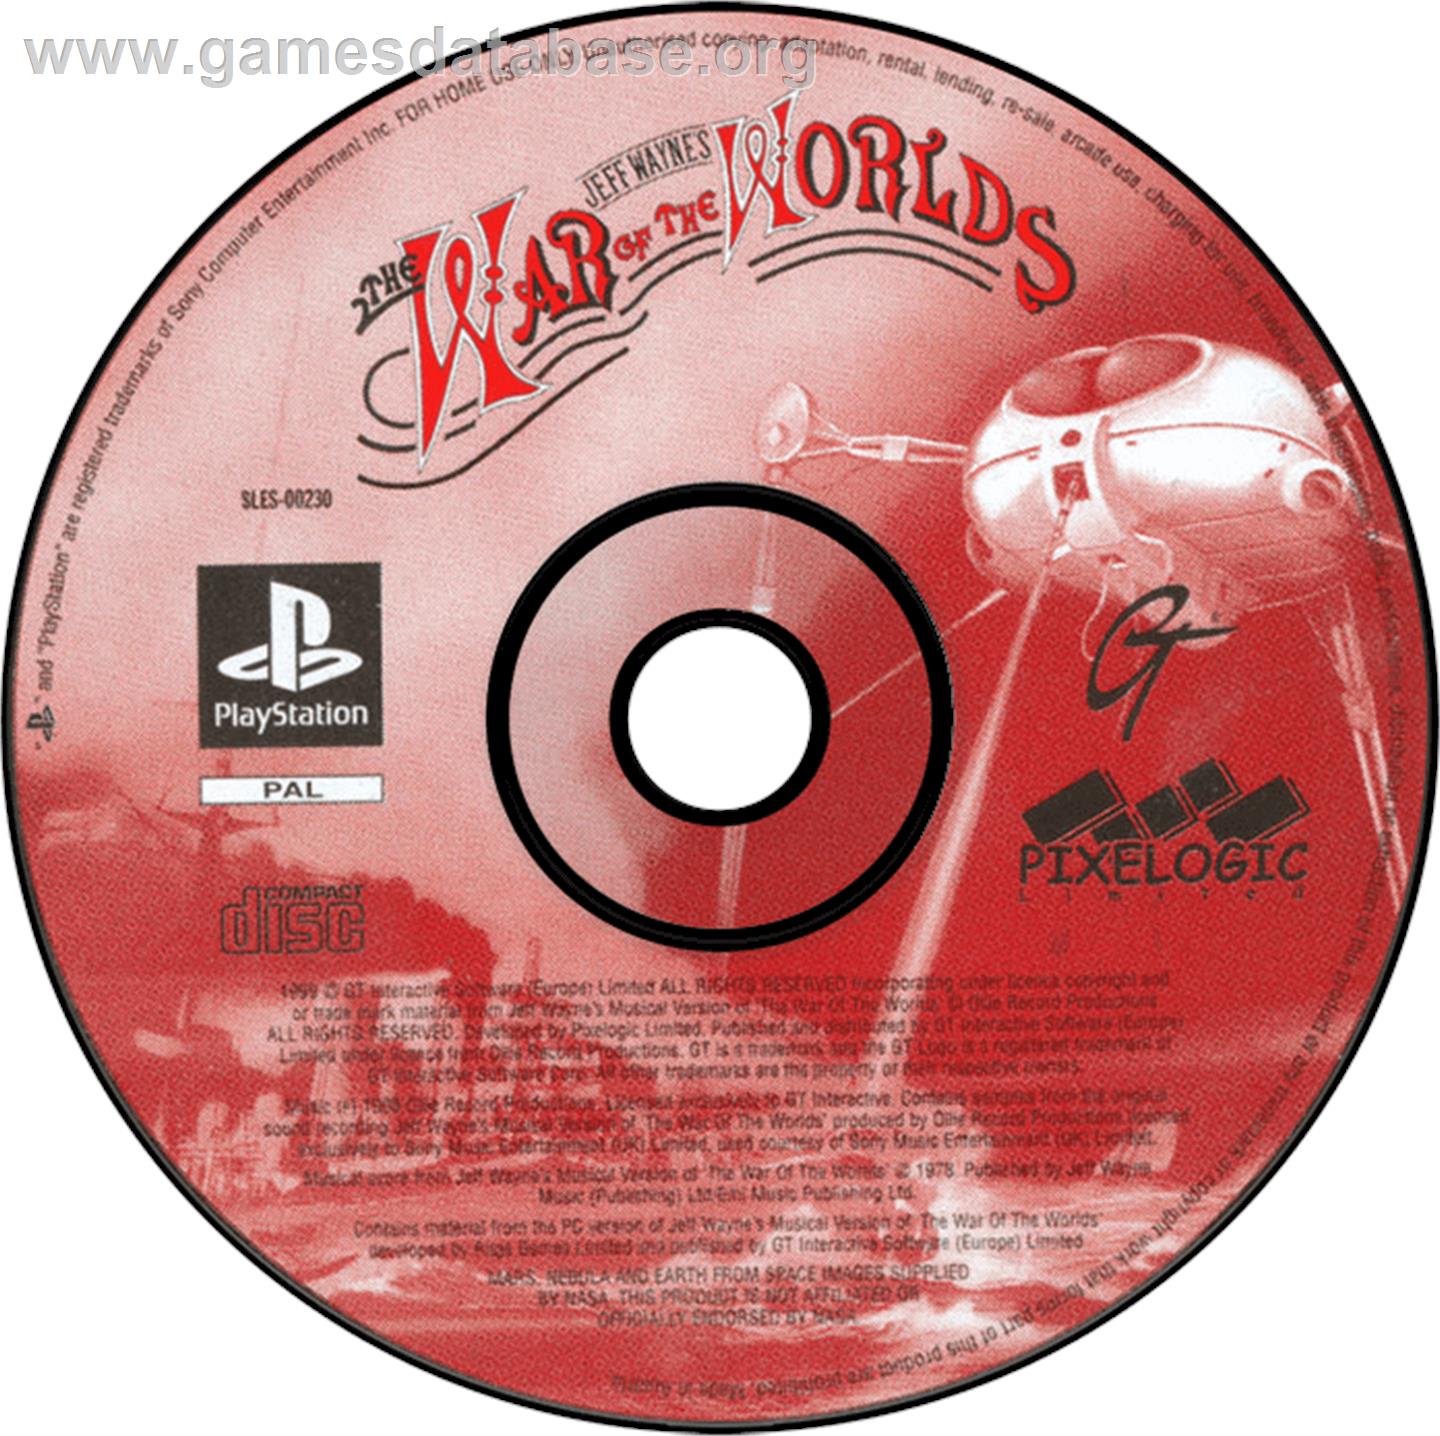 Jeff Wayne's The War of the Worlds - Sony Playstation - Artwork - Disc